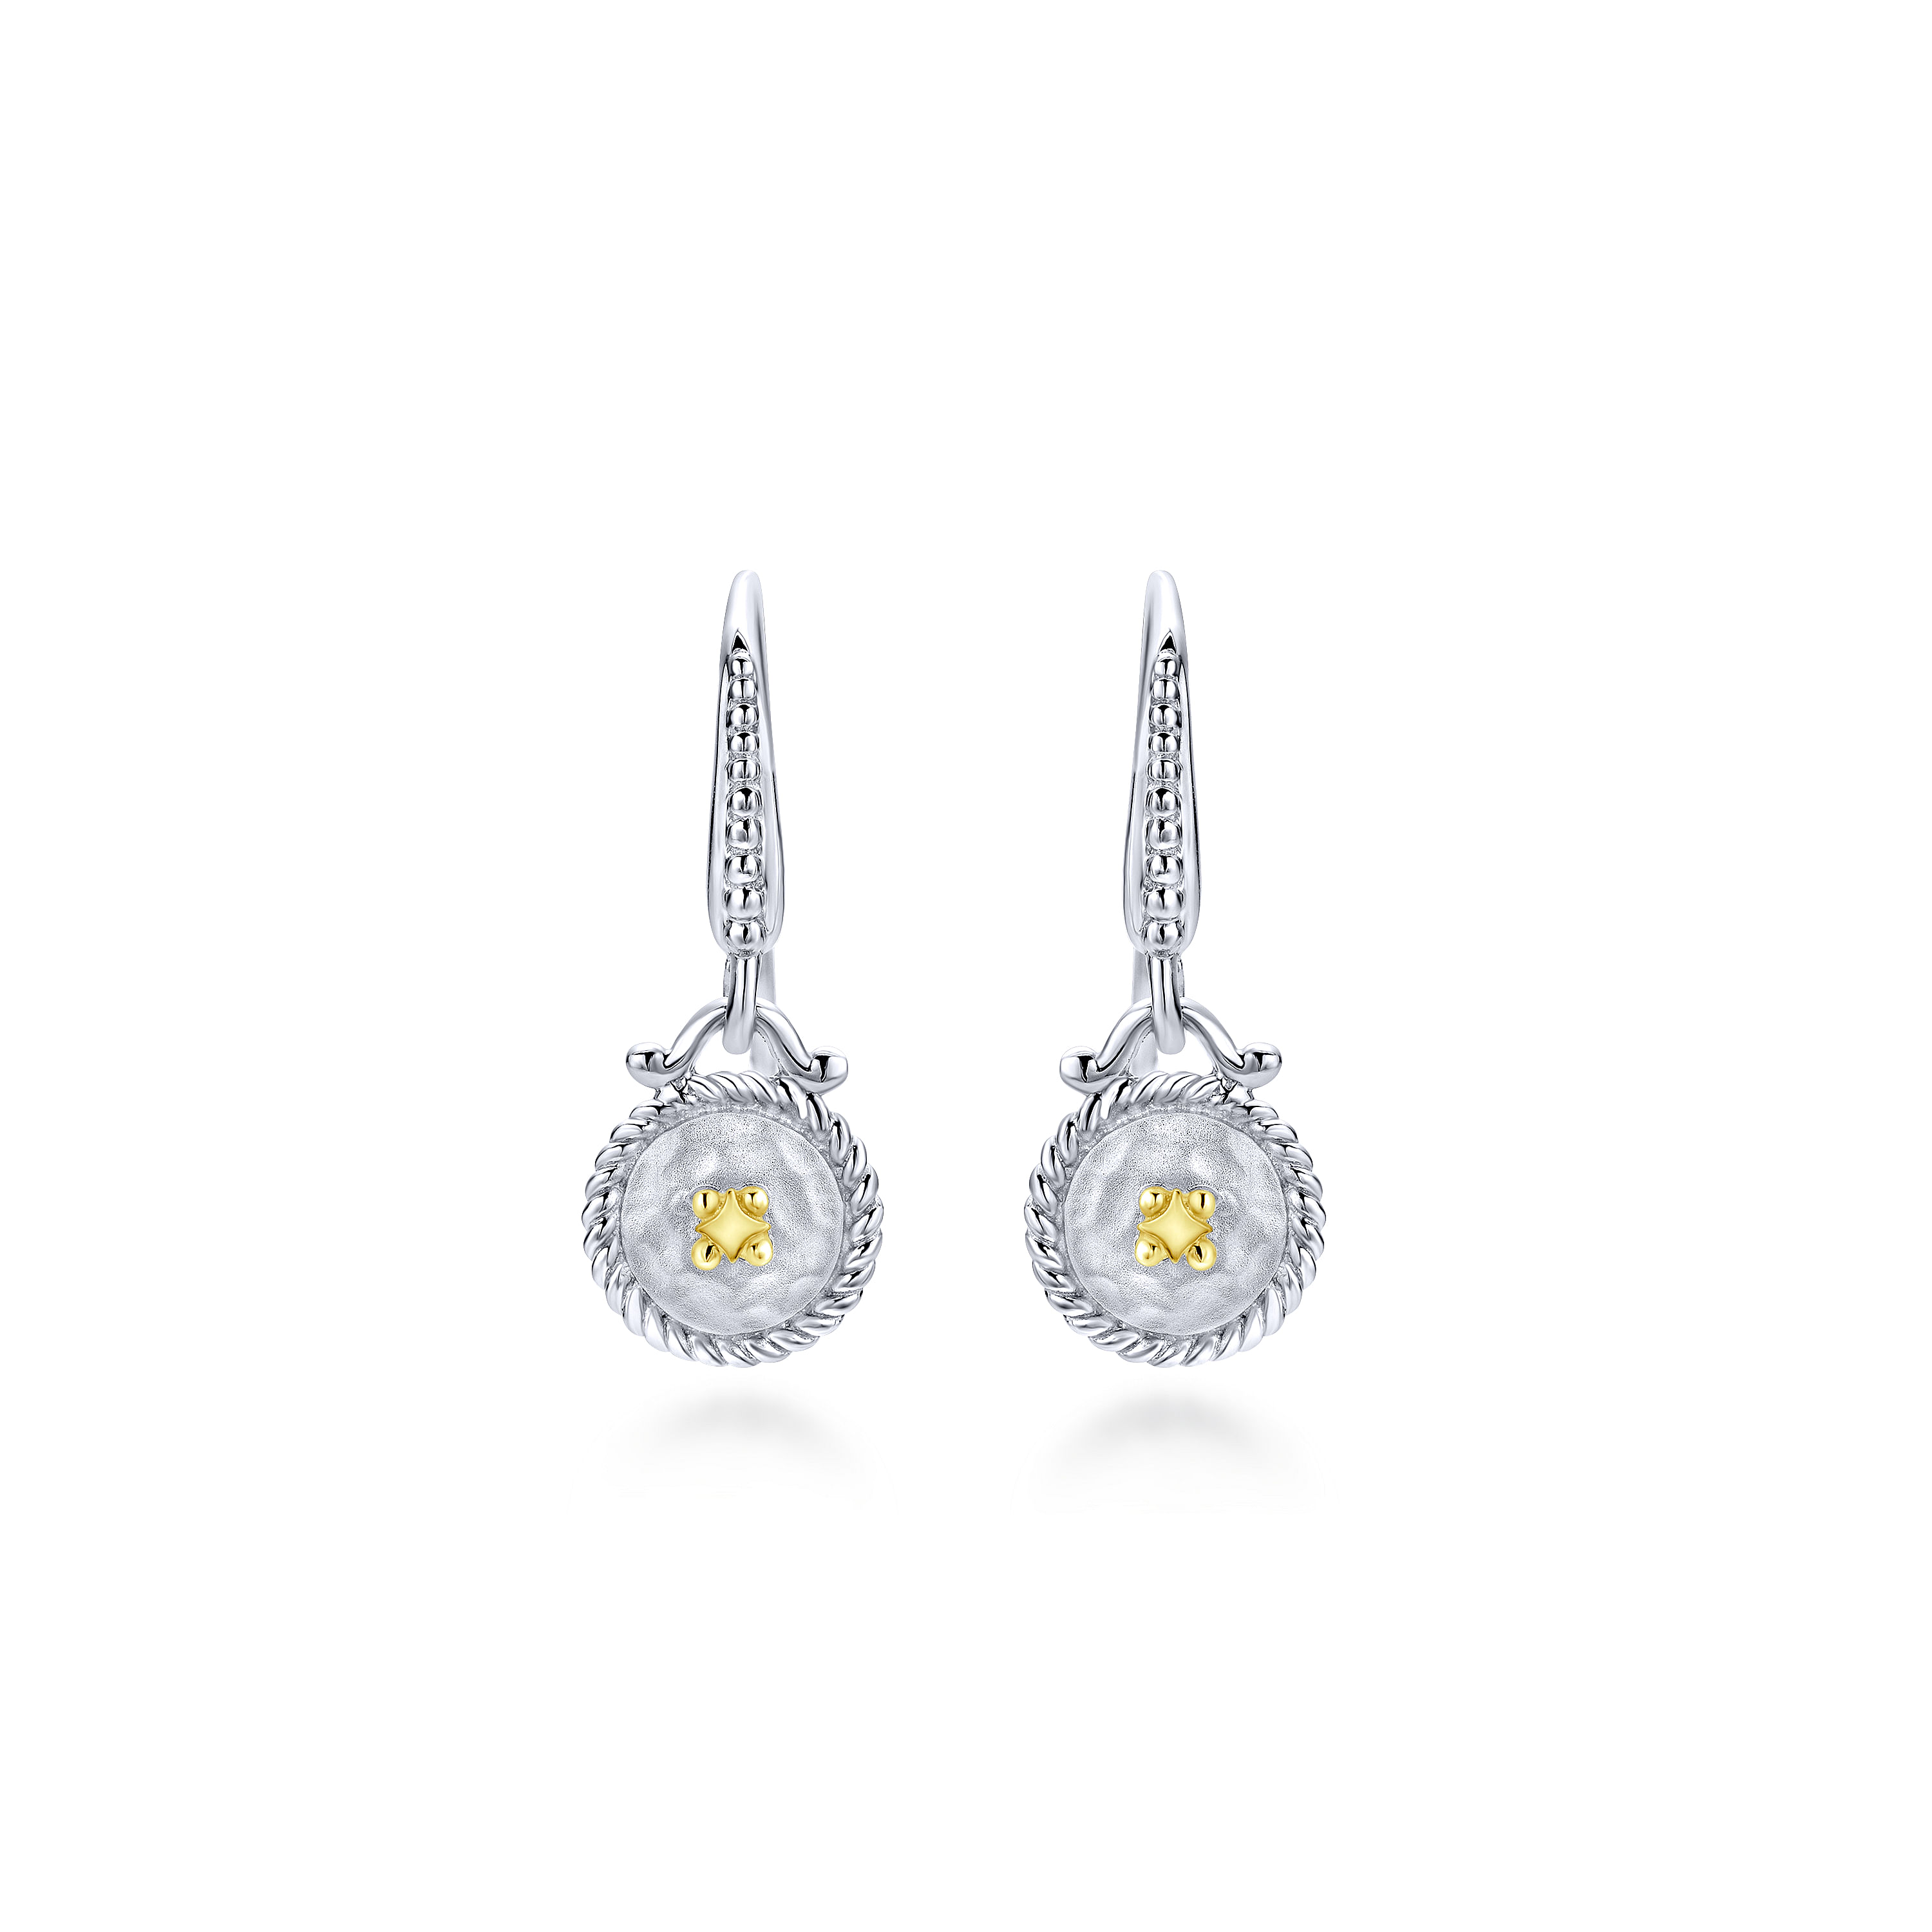 925 Sterling Silver and 18K Yellow Gold Vintage Inspired Round Drop Earrings